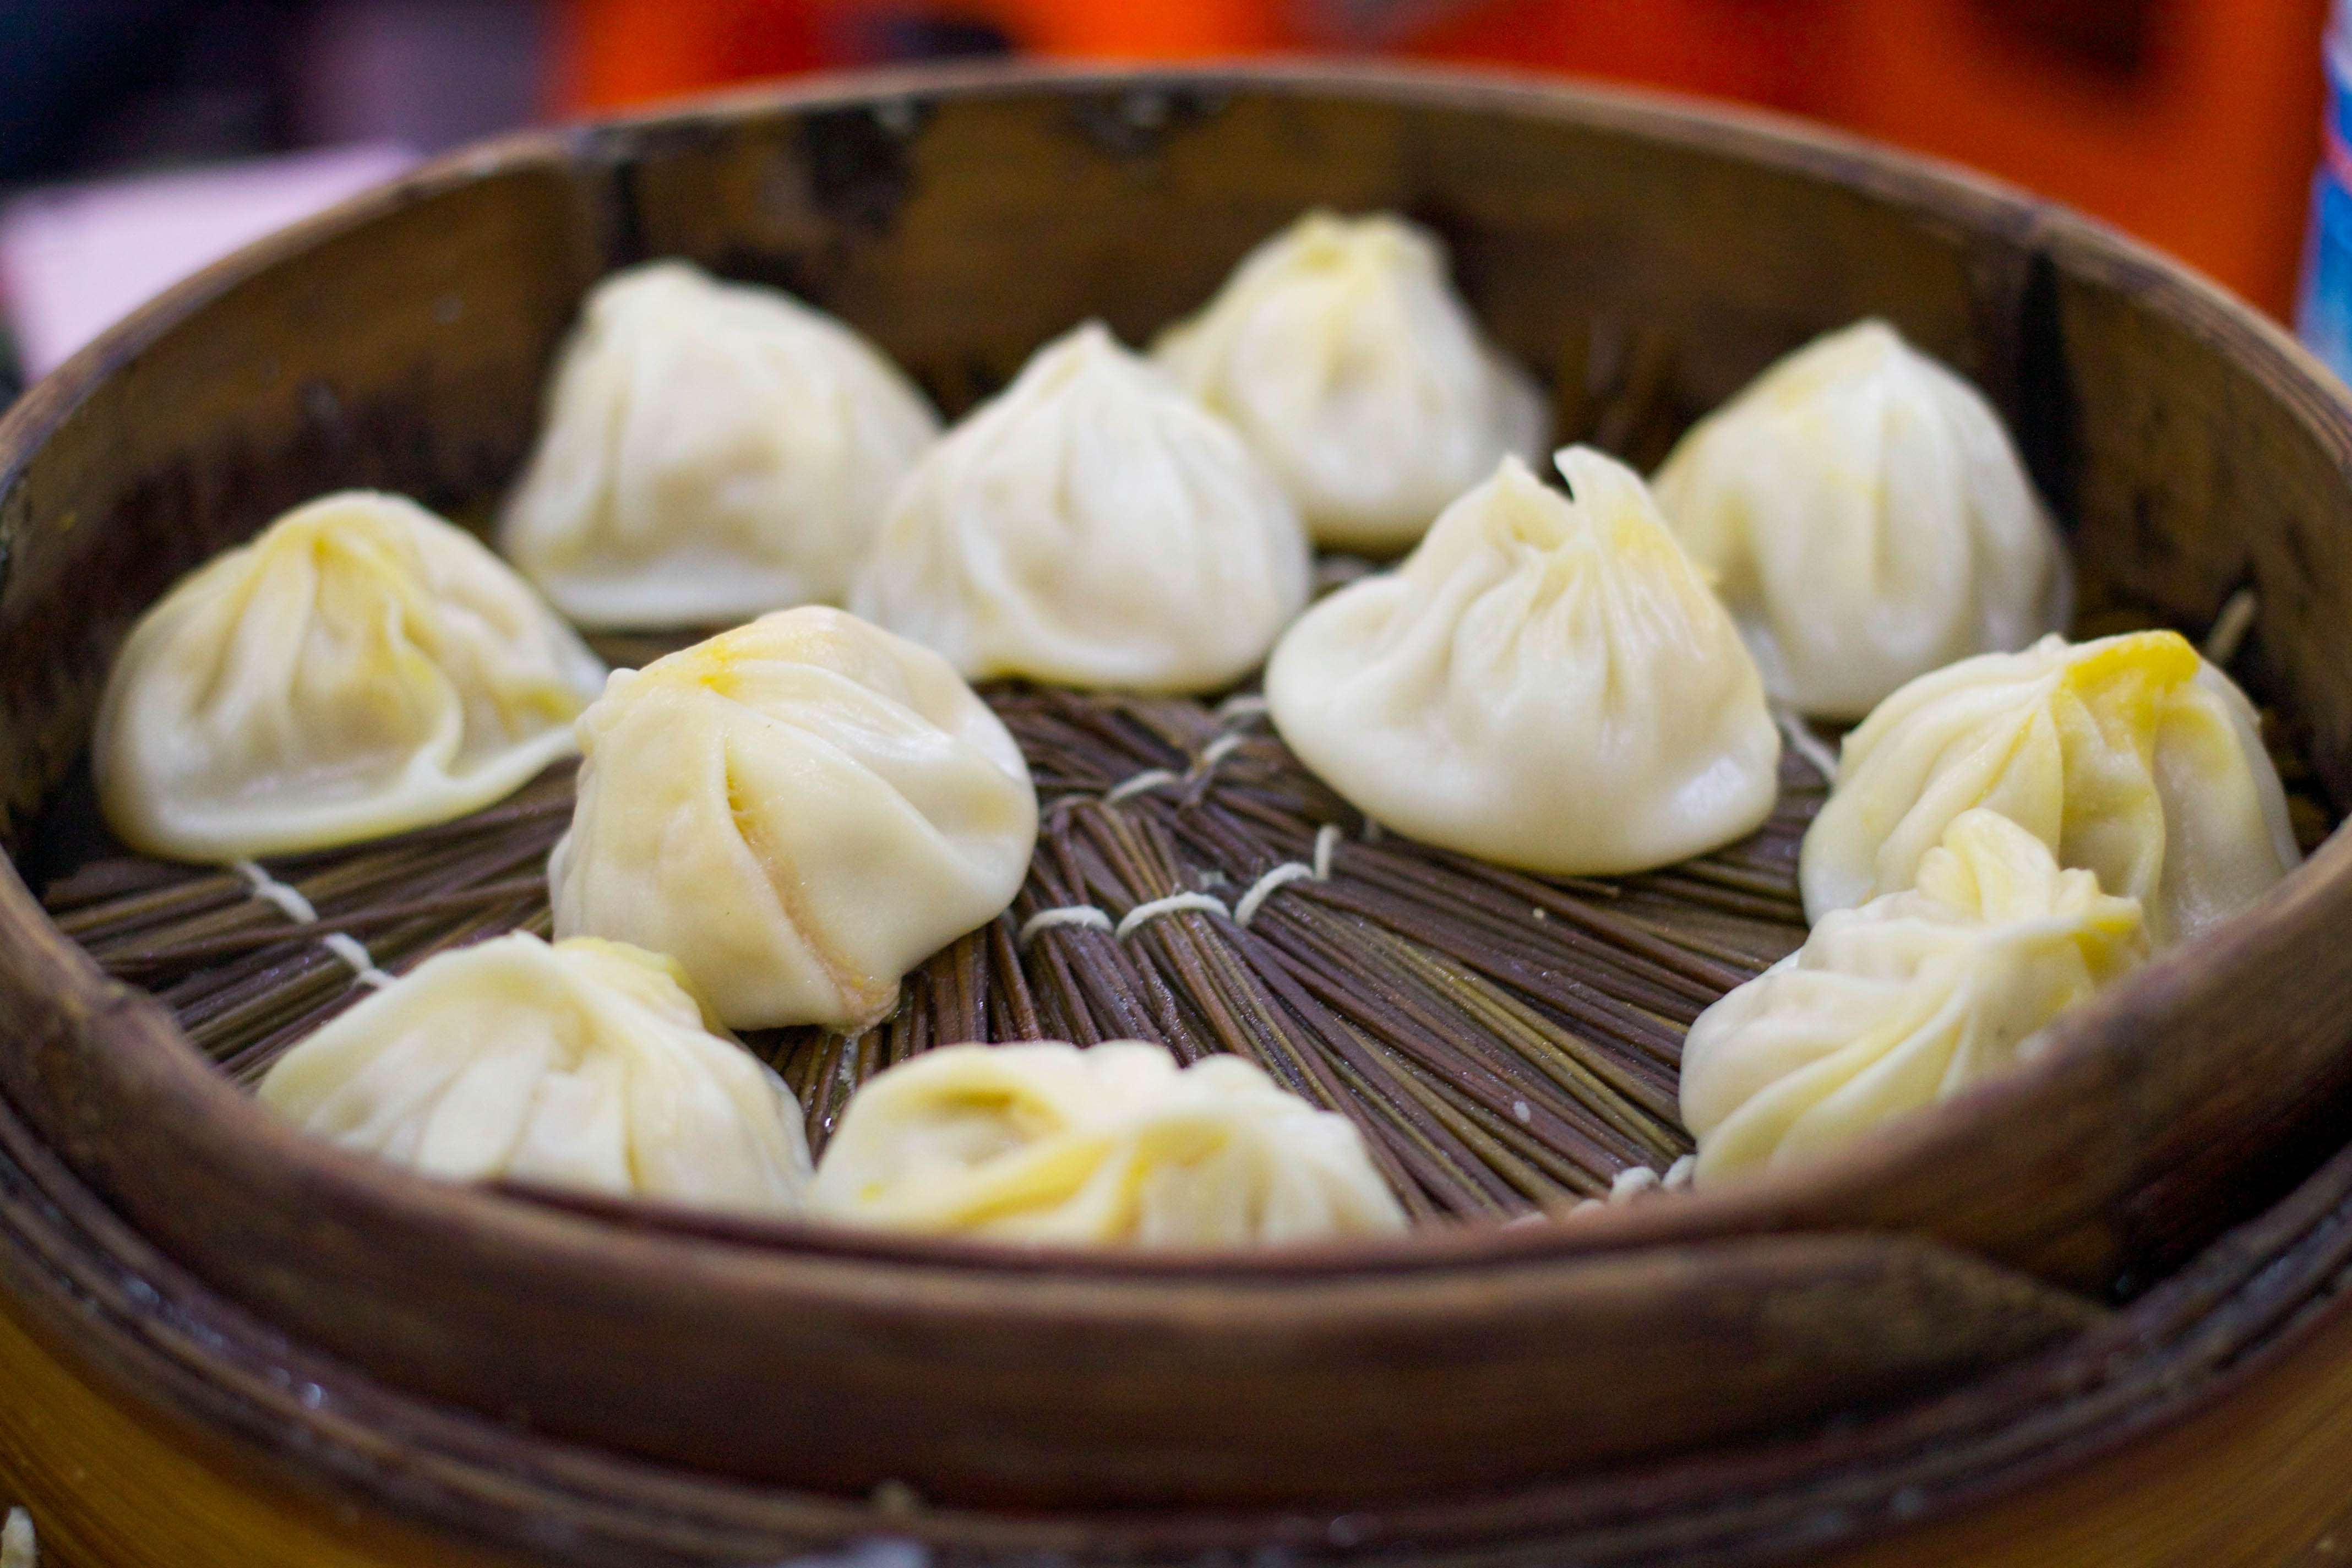 Xiaolongbao, a famous and traditional Shanghai dim sum